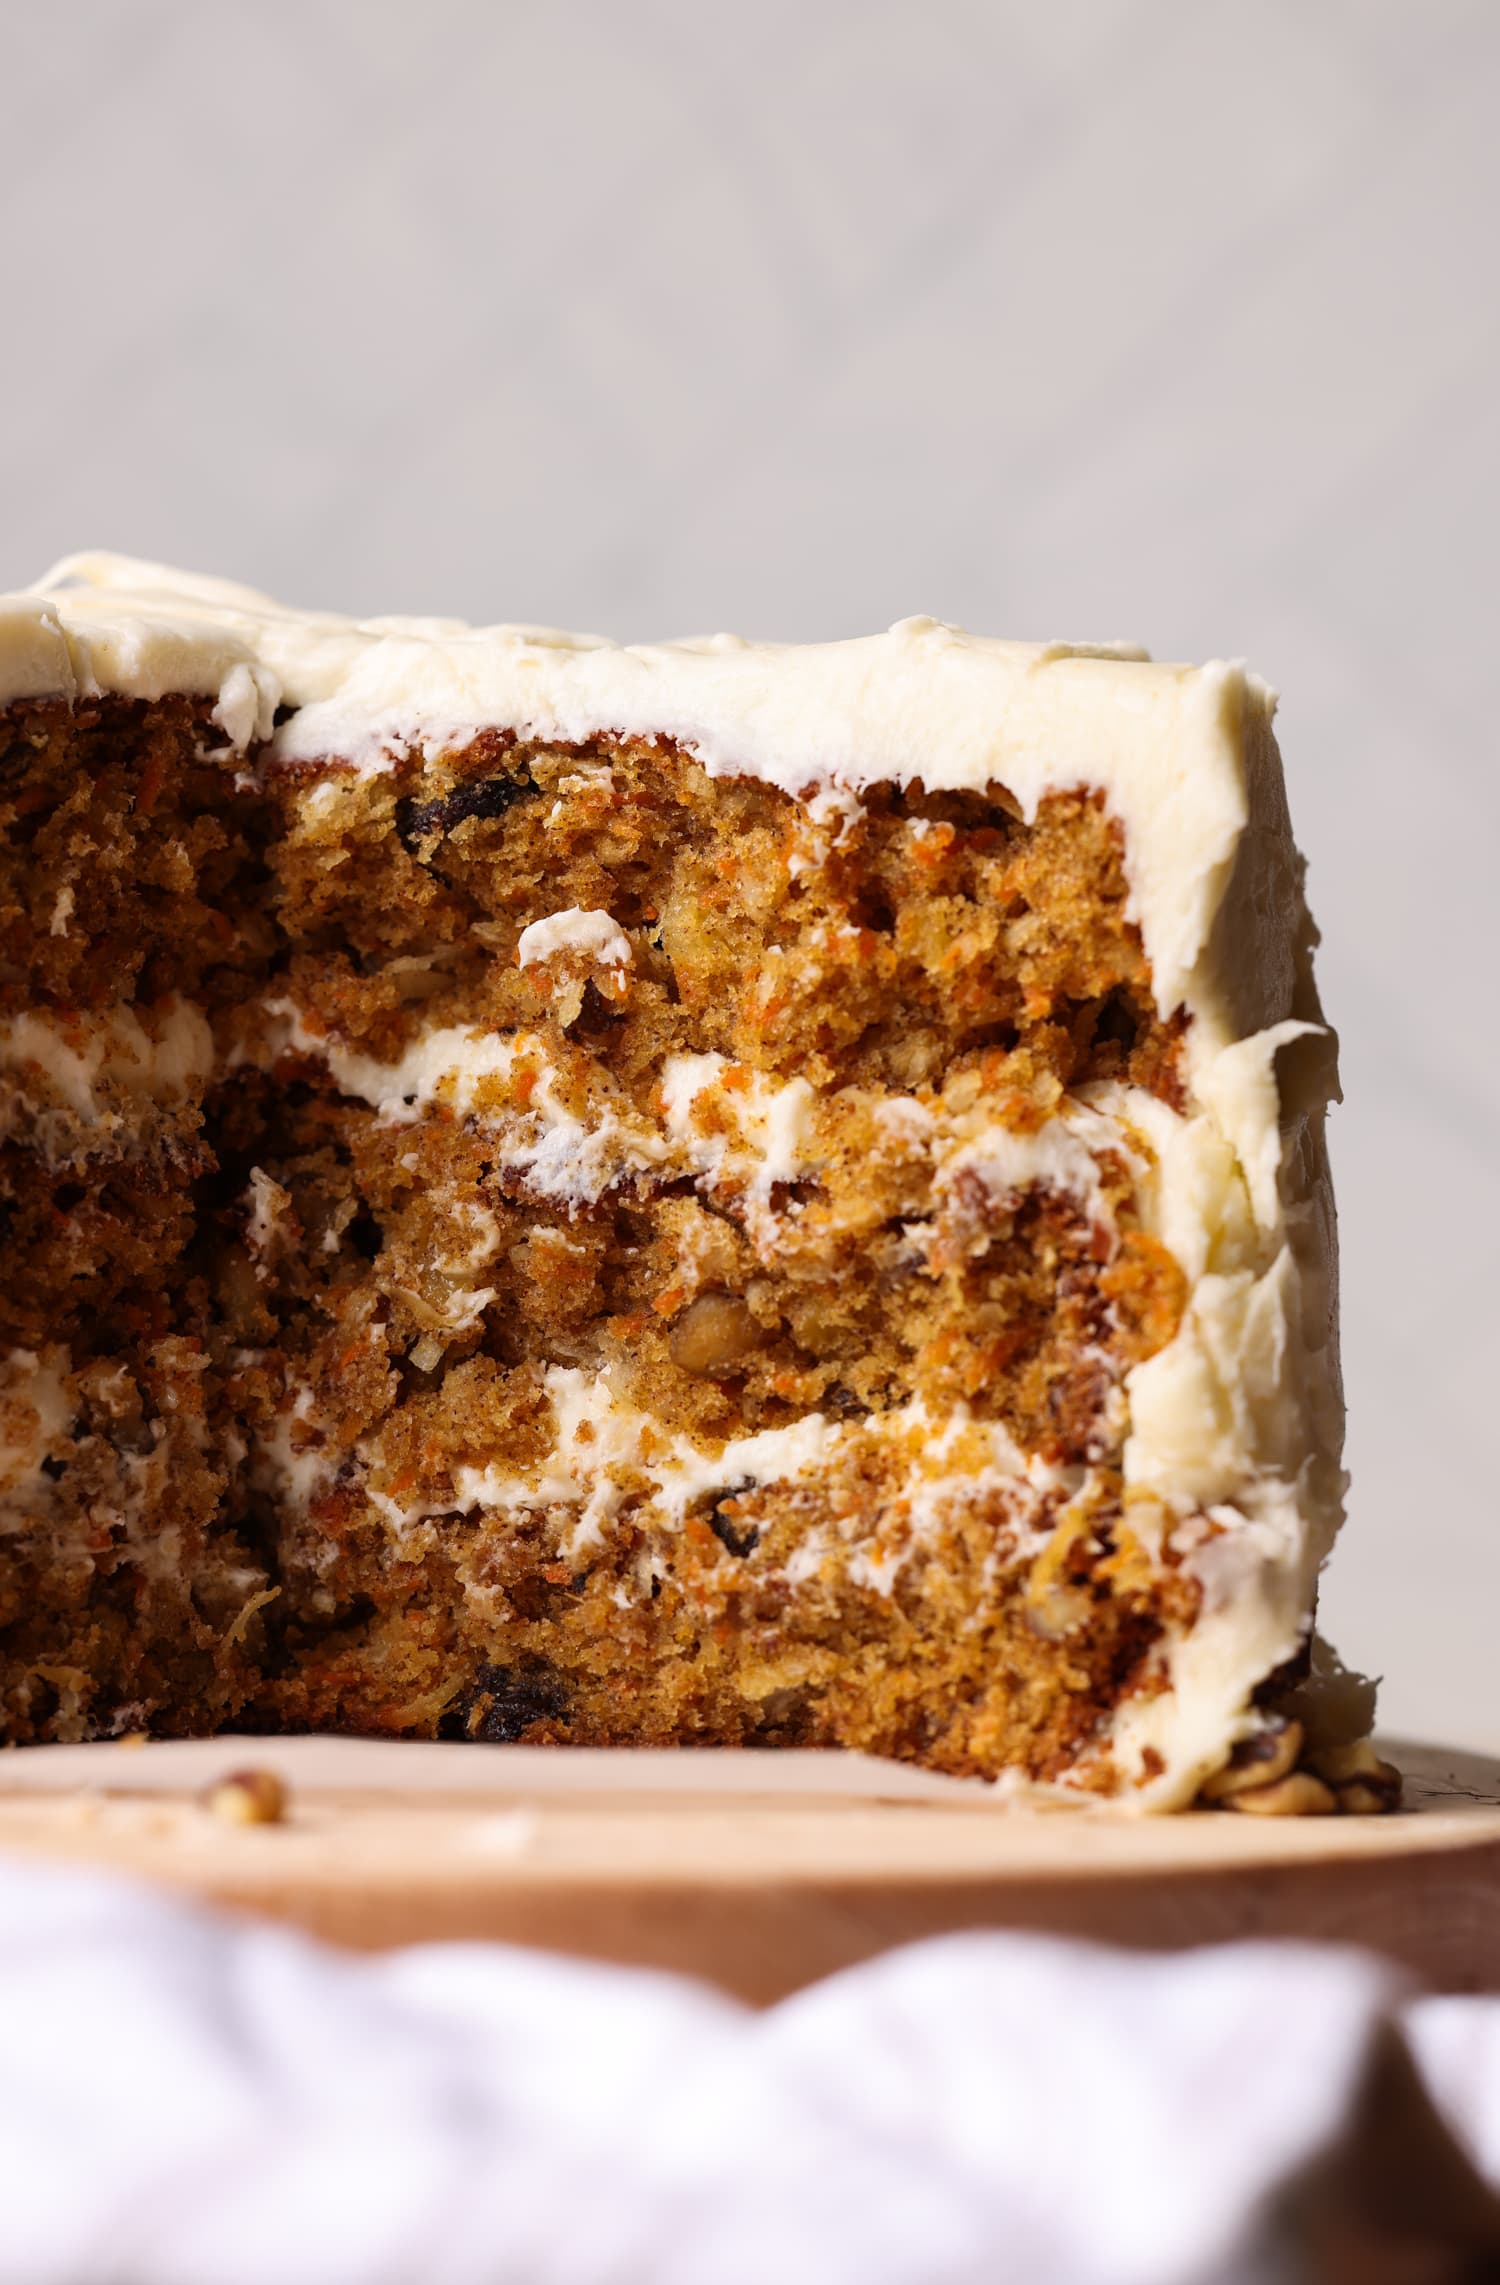 a whole layered carrot cake sliced